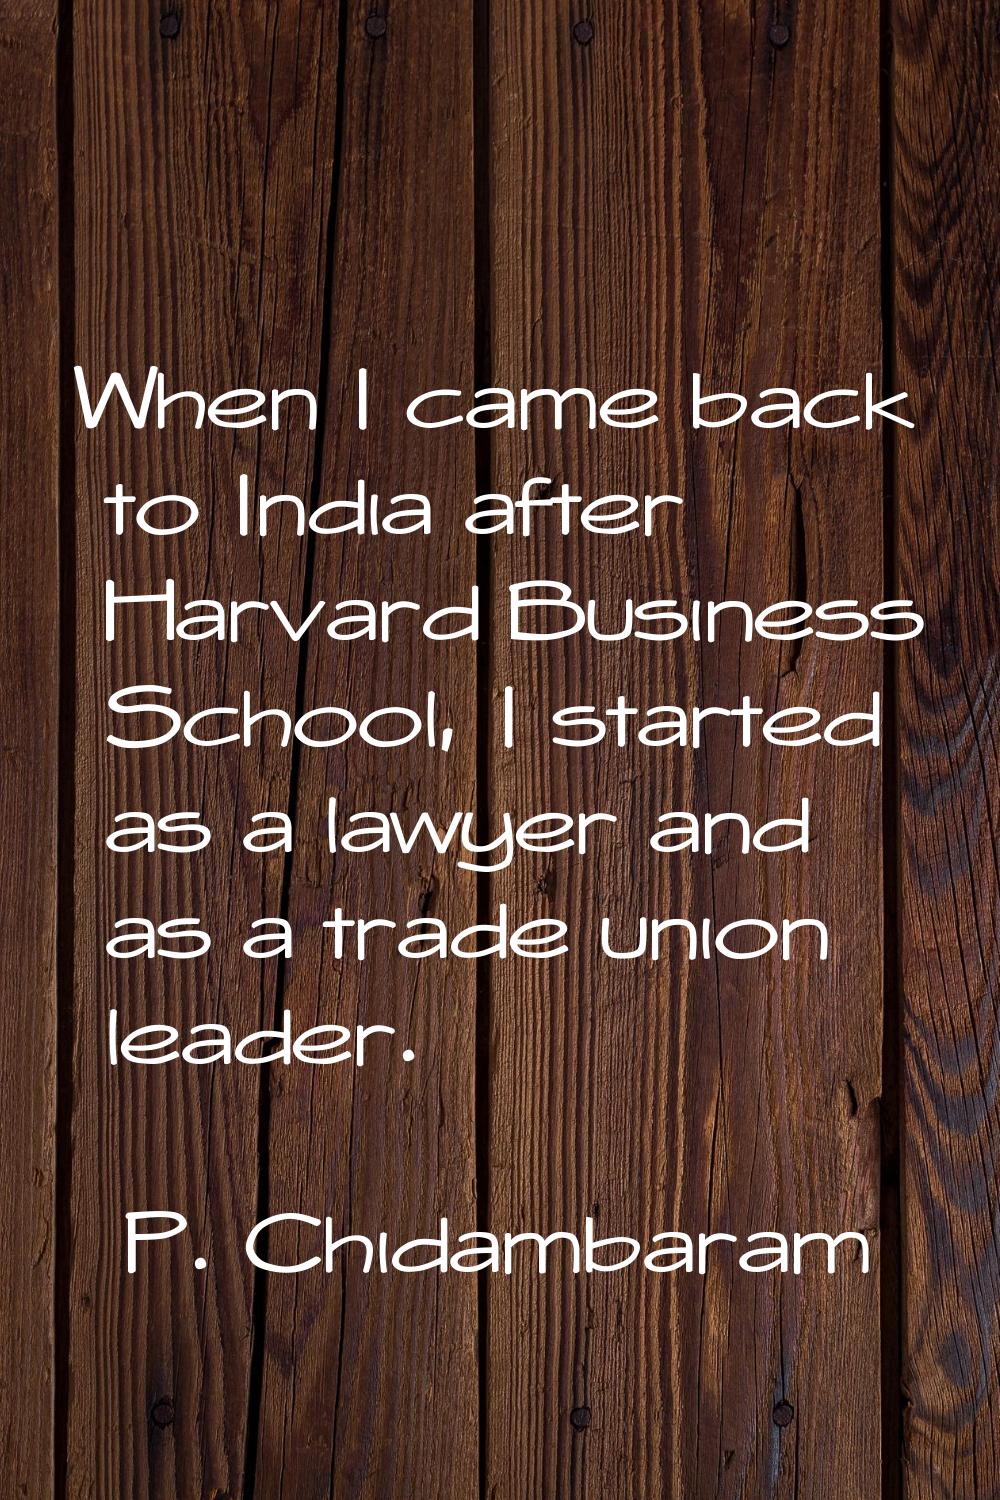 When I came back to India after Harvard Business School, I started as a lawyer and as a trade union